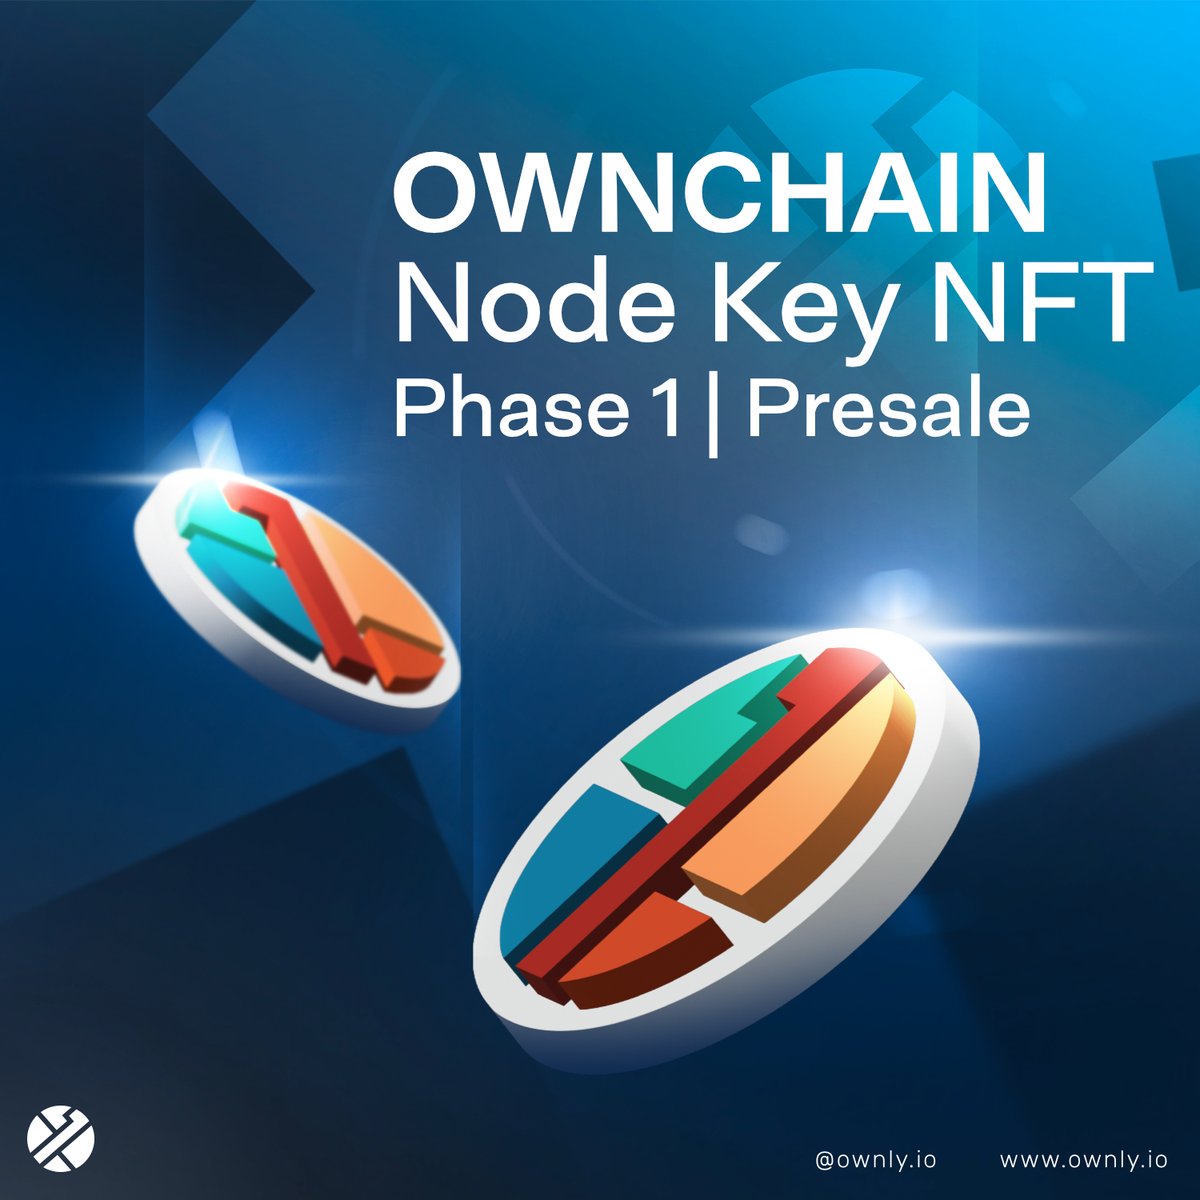 OWNCHAIN Node Key NFT Presale Phase 1: 🟦 Send 0.03 ETH to 0x672b733C5350034Ccbd265AA7636C3eBDDA2223B - Open for 72 hours - 1 node per wallet address only - ETH on Arbitrum is preferred but we will accept main net as well - DO NOT SEND FROM AN EXCHANGE - RT for a chance to win…